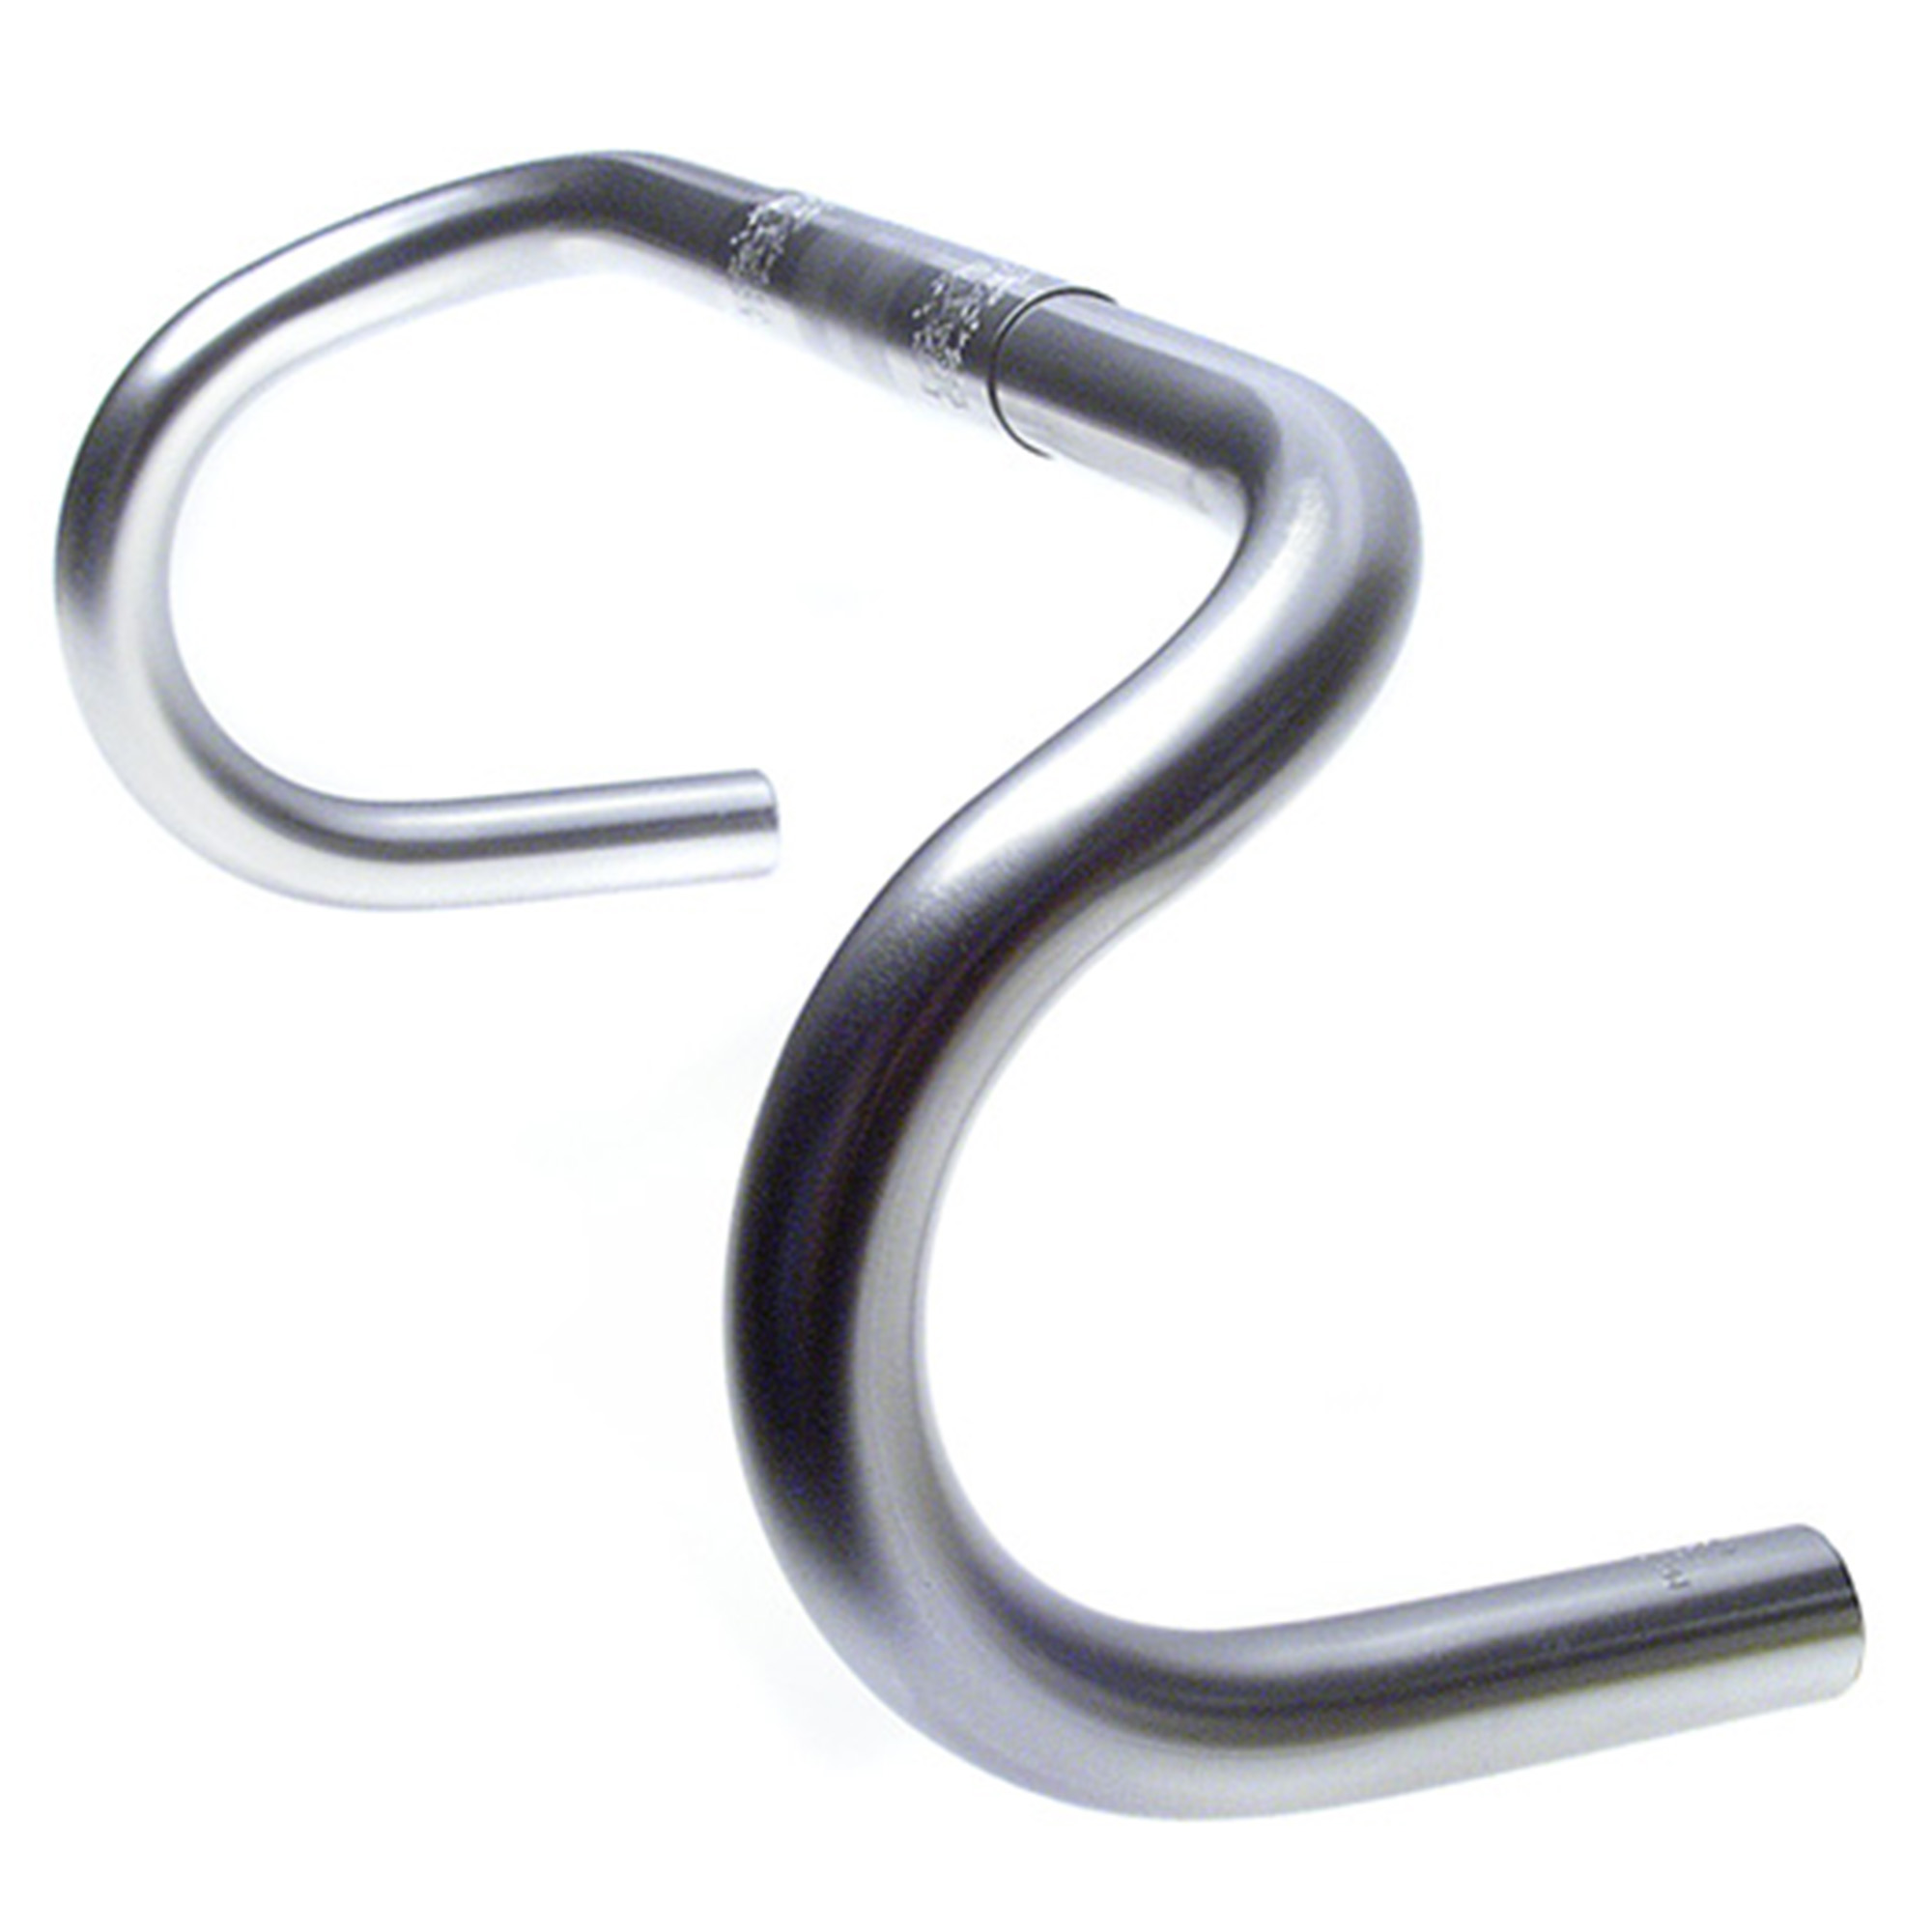 Nitto Noodle 177 Handlebar 42cm Width 26.0mm Bar Clamp 140mm Drop Alloy Silver